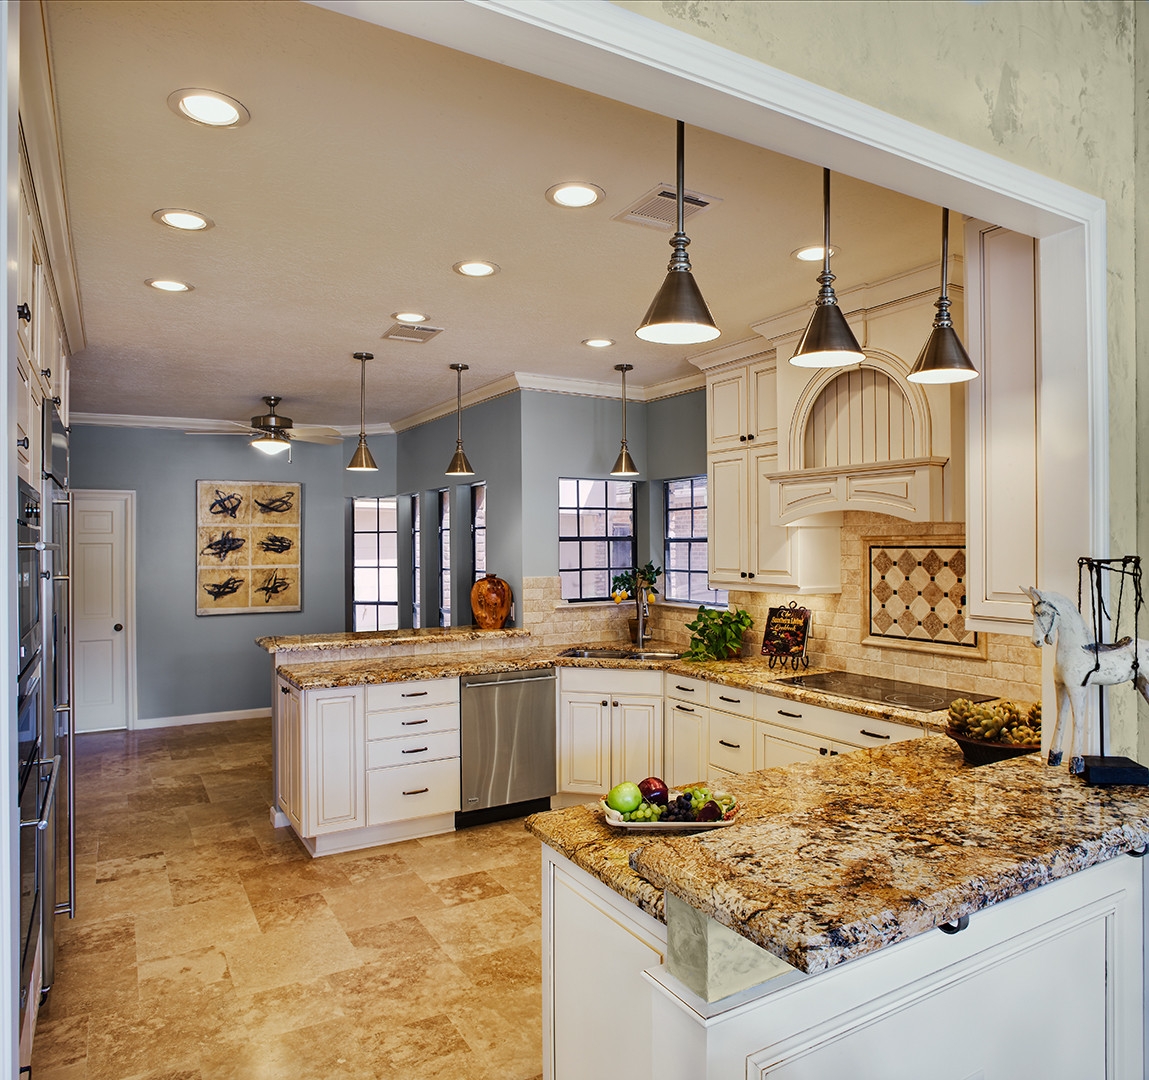 Remodel A Kitchen
 5 Easy Steps for a Beautiful Kitchen Renovation